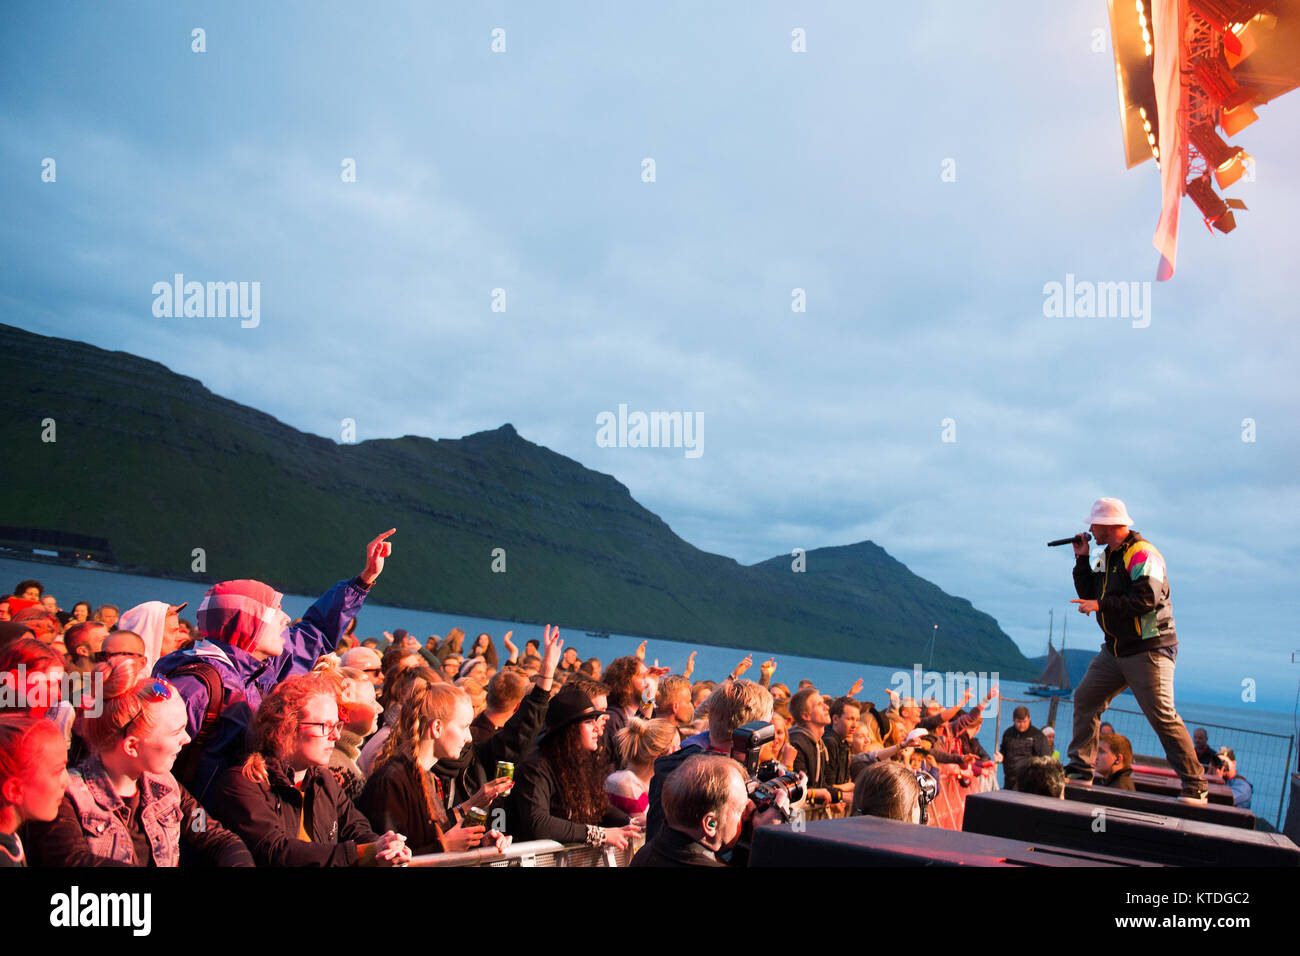 The legendary Danish rap group Malk De Koijn performs a live concert at the Faroese music festival G! Festival 2014. The group consists of Blæs Bukki, Geolo Geo and Tue Track (pictured). Faroe Islands 18.07.2014. Stock Photo